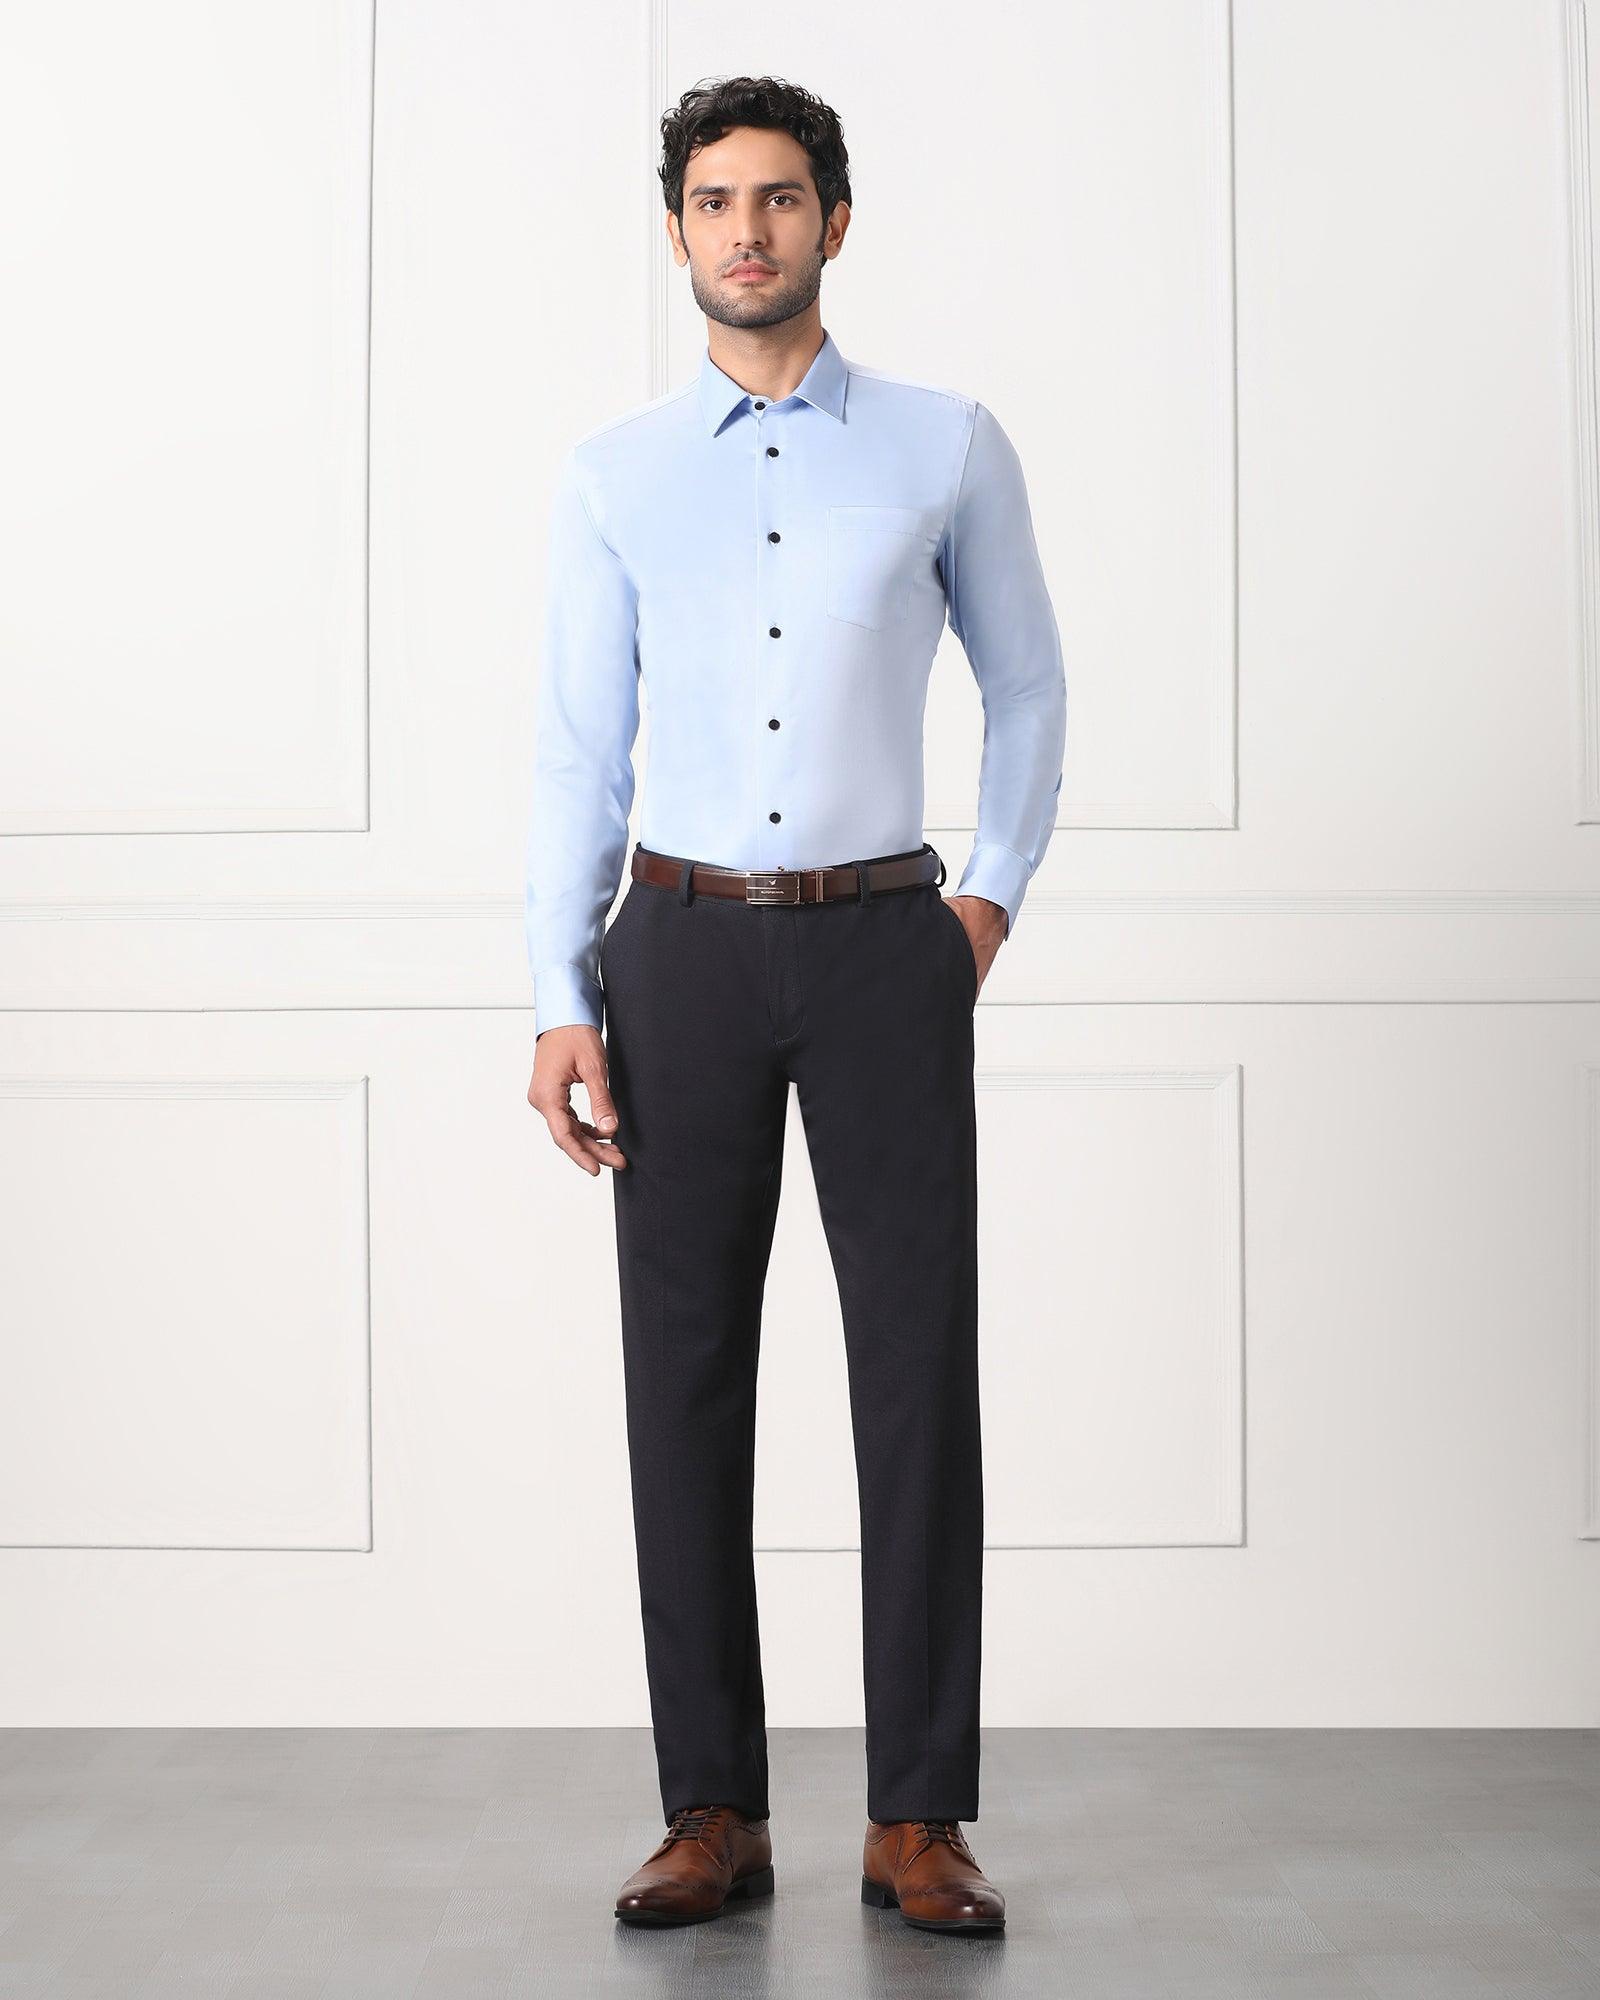 Dark blue formal shirt with cream color trouser is a perfect outfit for men  | Blue shirt men, Blue shirt outfit men, Blue shirt outfits